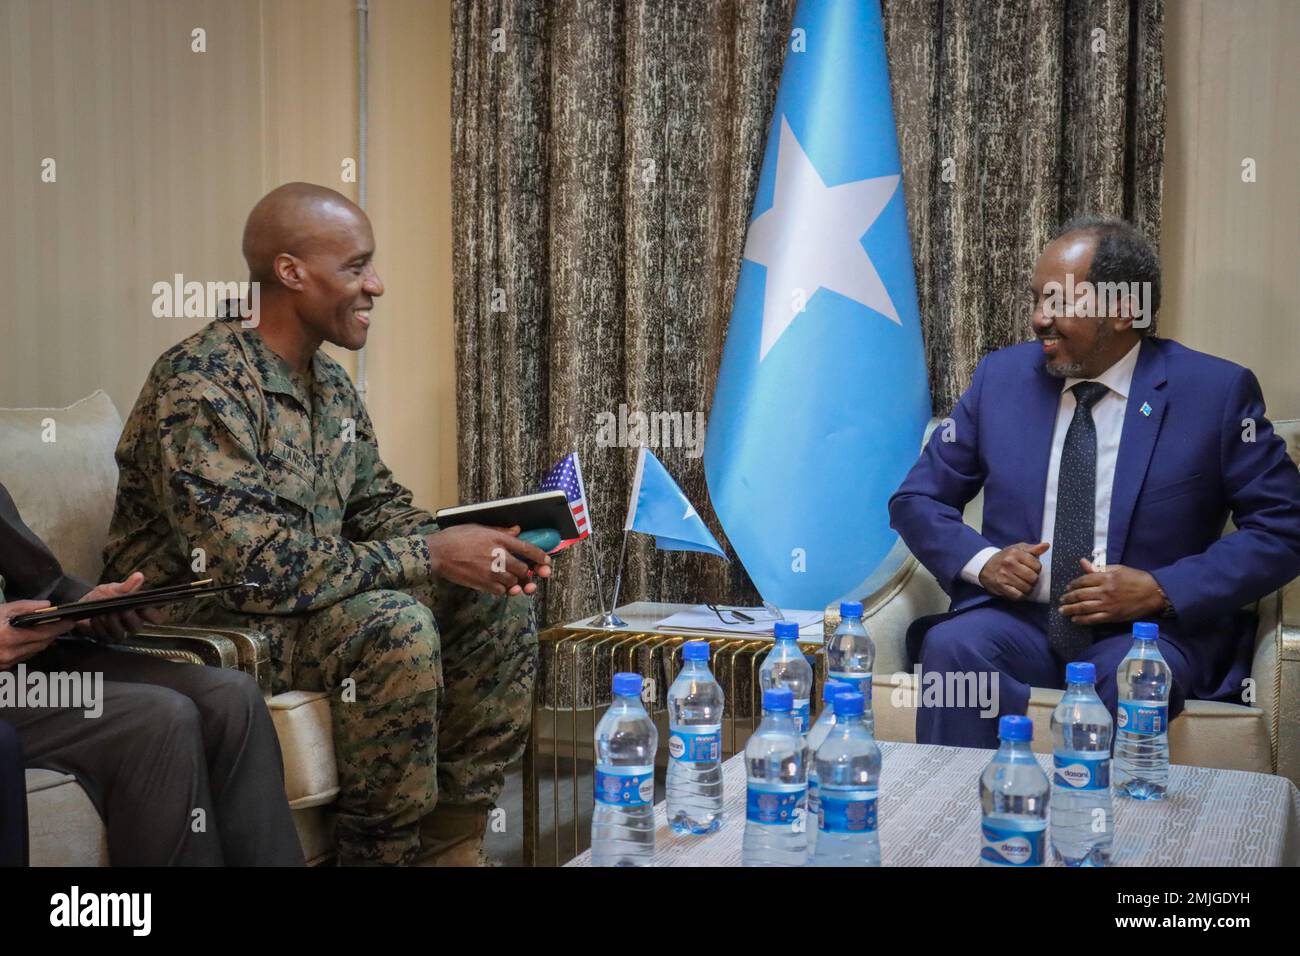 U.S. Marine Corps Gen. Michael Langley, commander, U.S. Africa Command, meets with Somalia President Hassan Sheikh Mohamud in Somalia on Aug. 29, 2022. The visit came as part of a four-day trip to Djibouti, Somalia, and Manda Bay, Kenya, from August 28-31, 2022, to meet with host nation leaders, senior interagency officials, and deployed troops to better understand the political and military situation in East Africa, discuss shared concerns and priorities, and see ongoing operations firsthand. Stock Photo